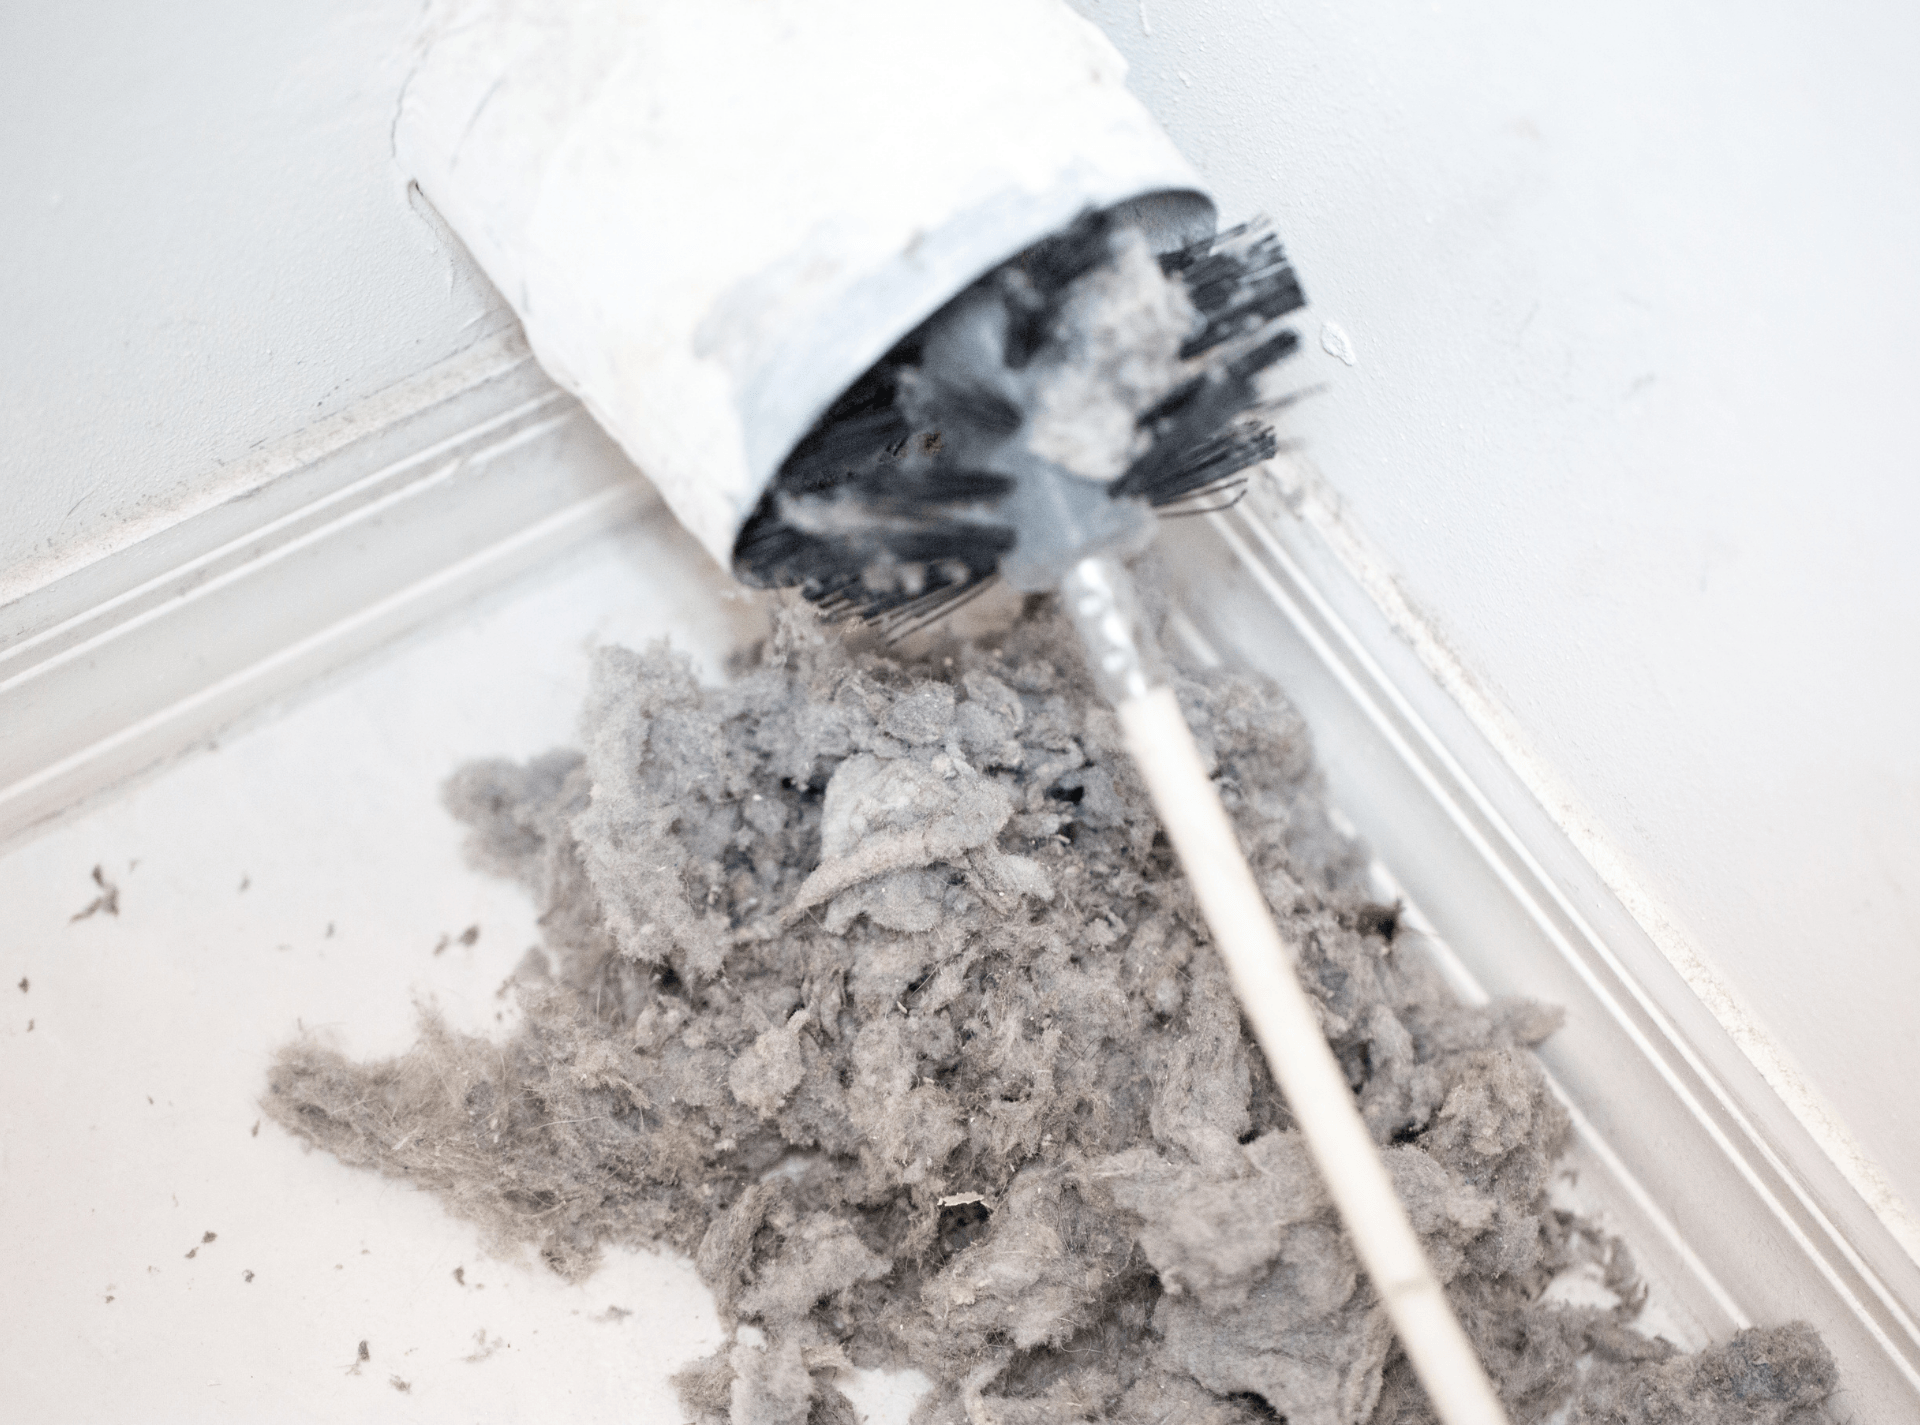 removing lint from dryer vent with a brush